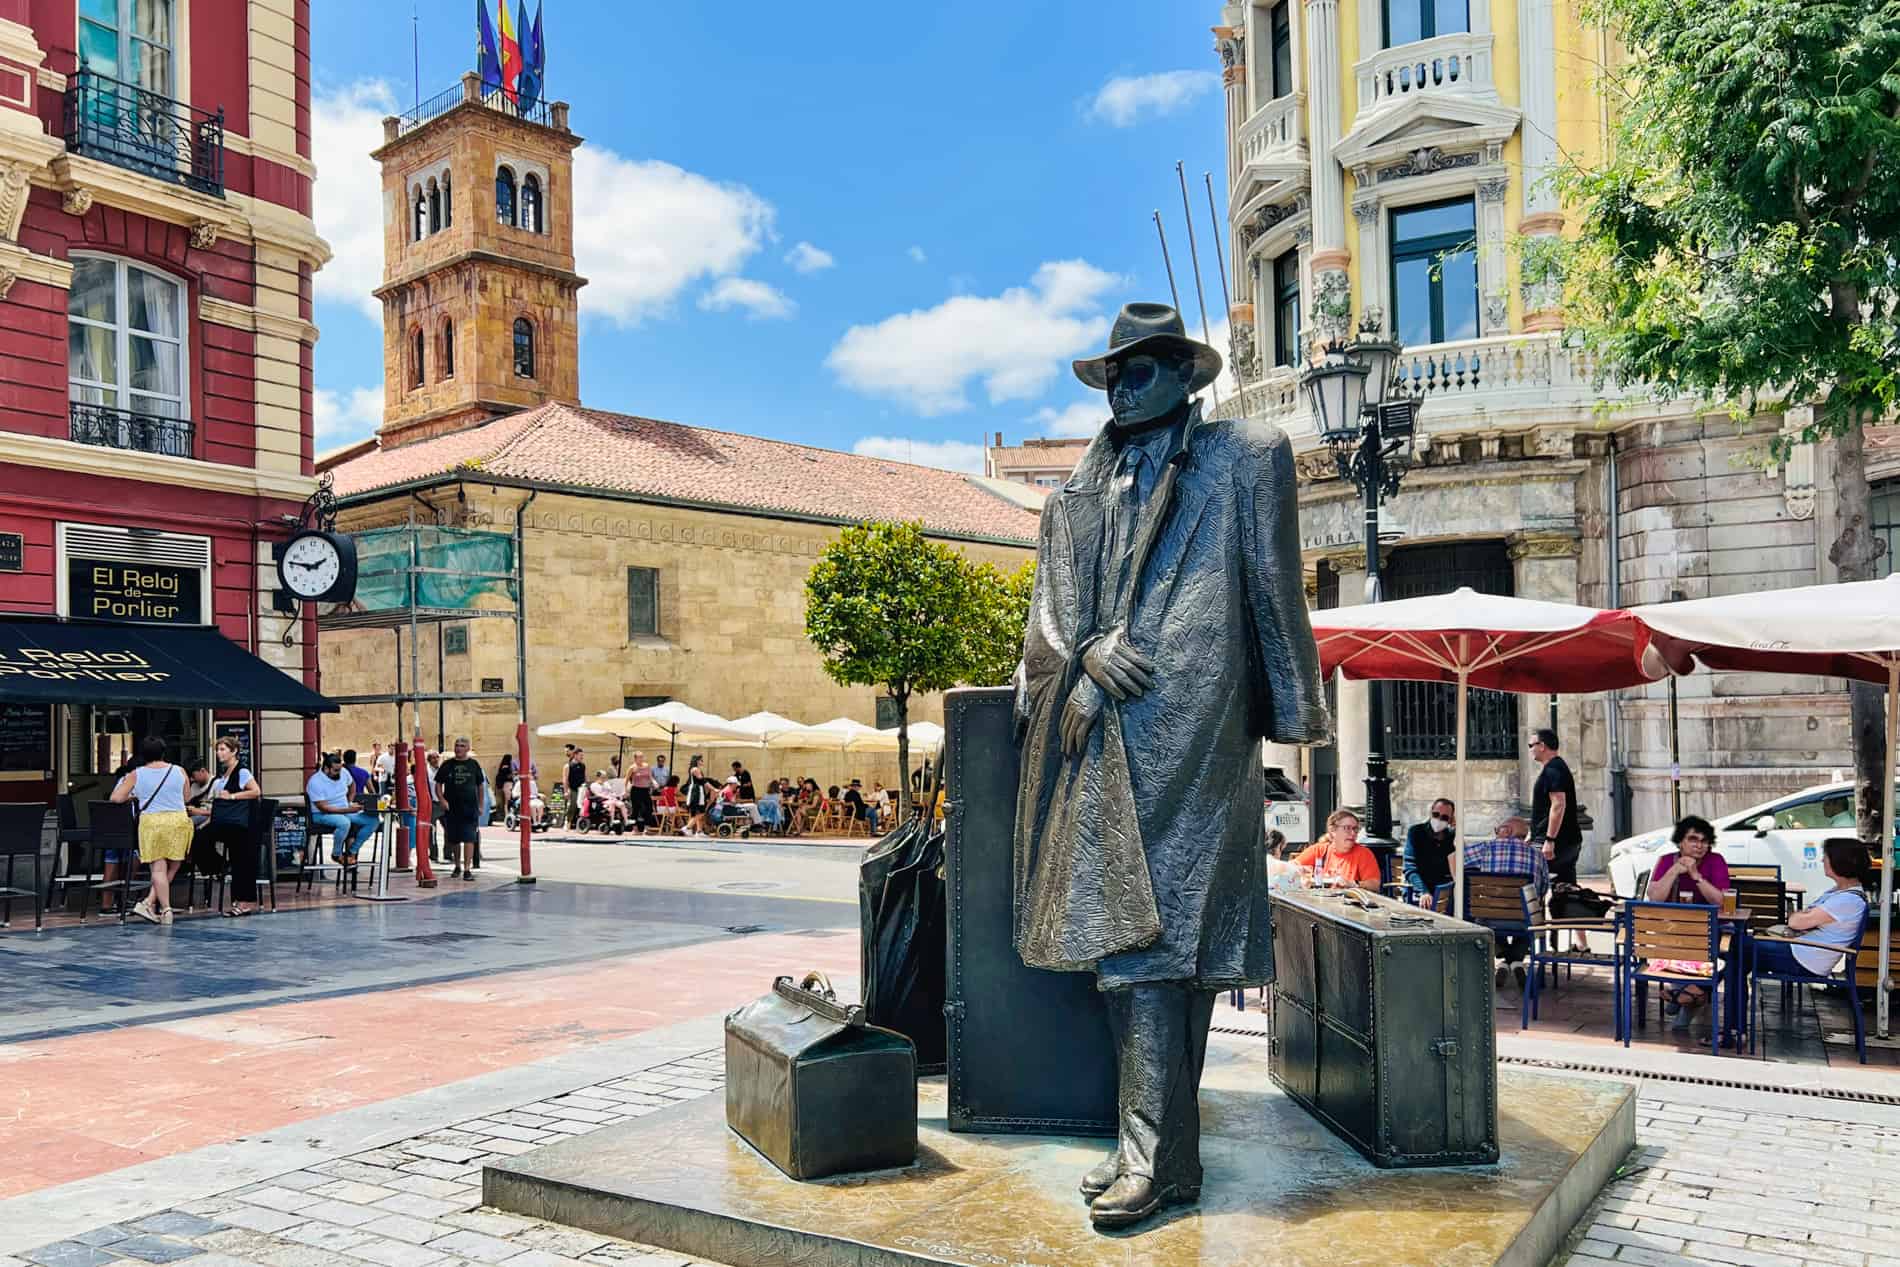 The El Regreso de Williams B. Arrensberg' traveller statue in Oviedo of a man in a long coat leaning against his suitcases.